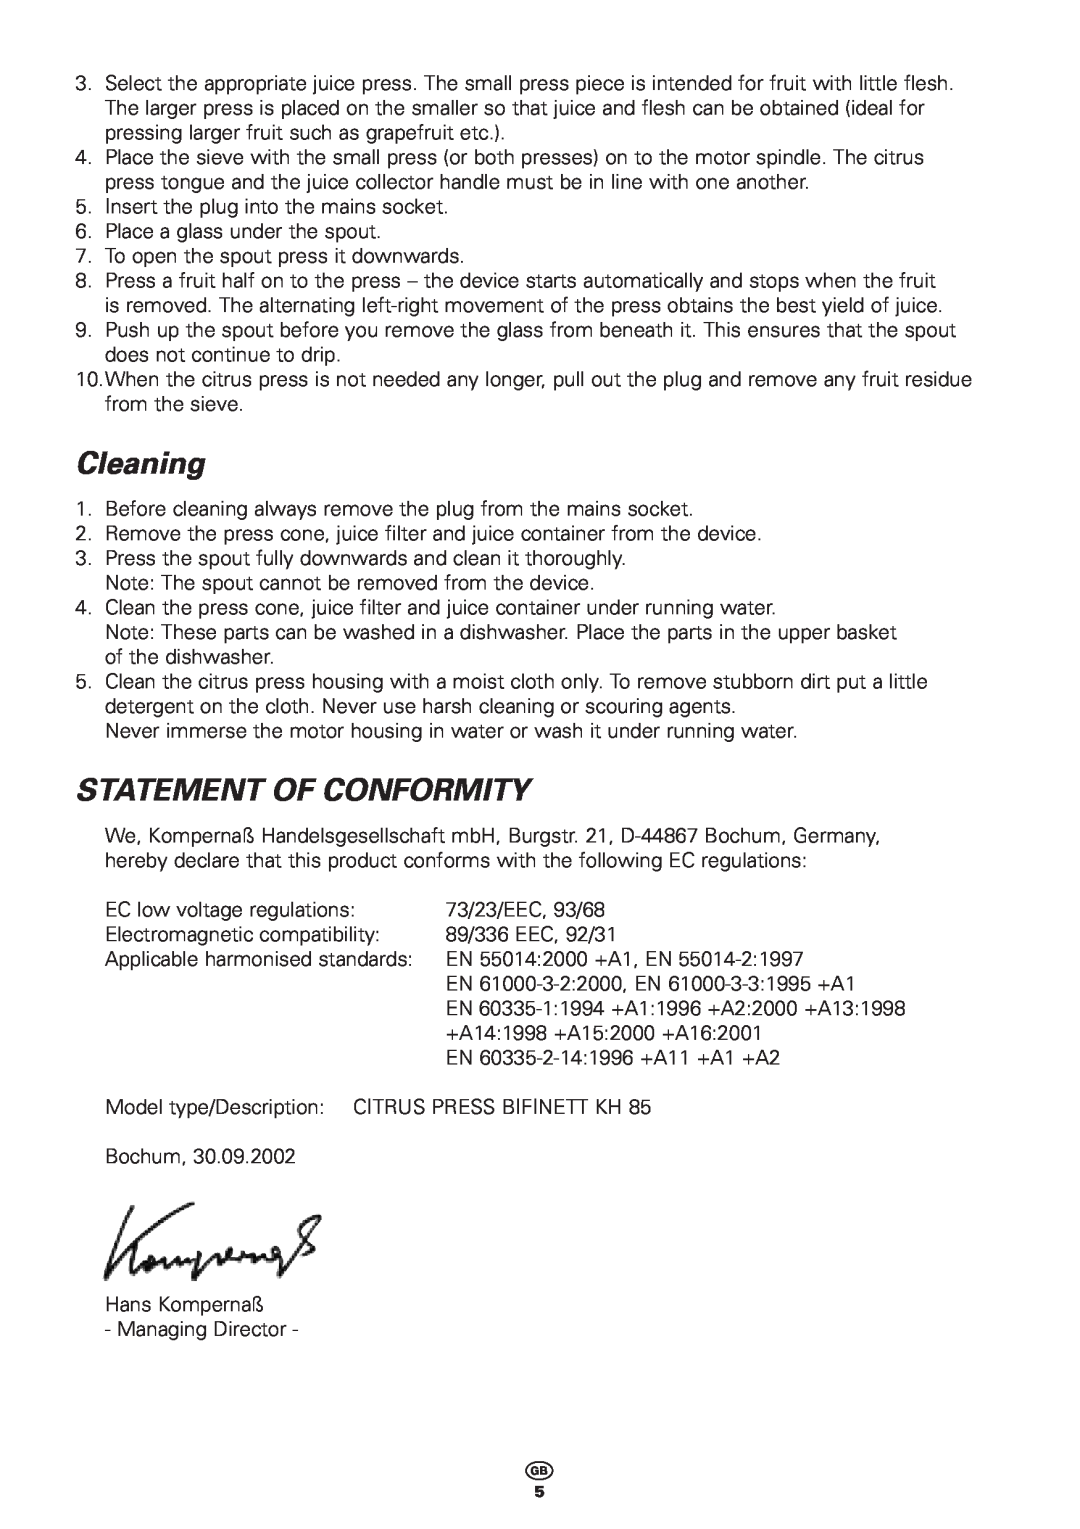 Bifinett KH 85 manual Cleaning, Statement Of Conformity 